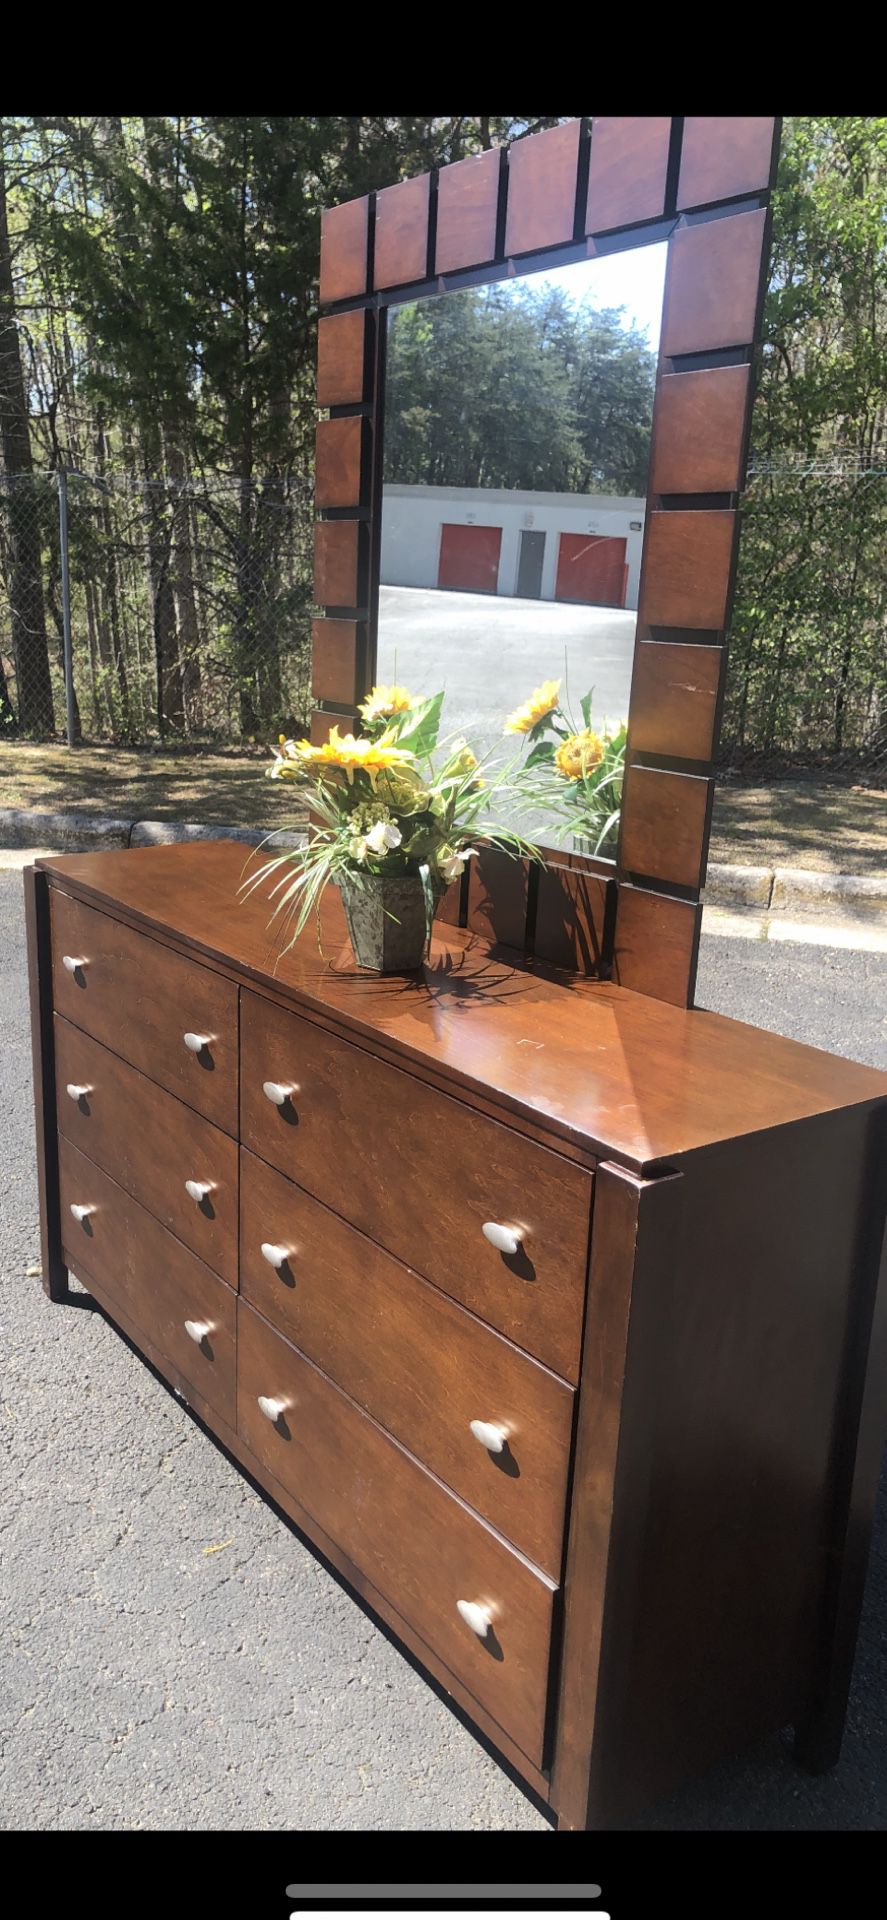 Quality Solid Wood Long Dresser With Big Drawers, Big Mirror. Drawers Sliding Smoothly Great Conditipn